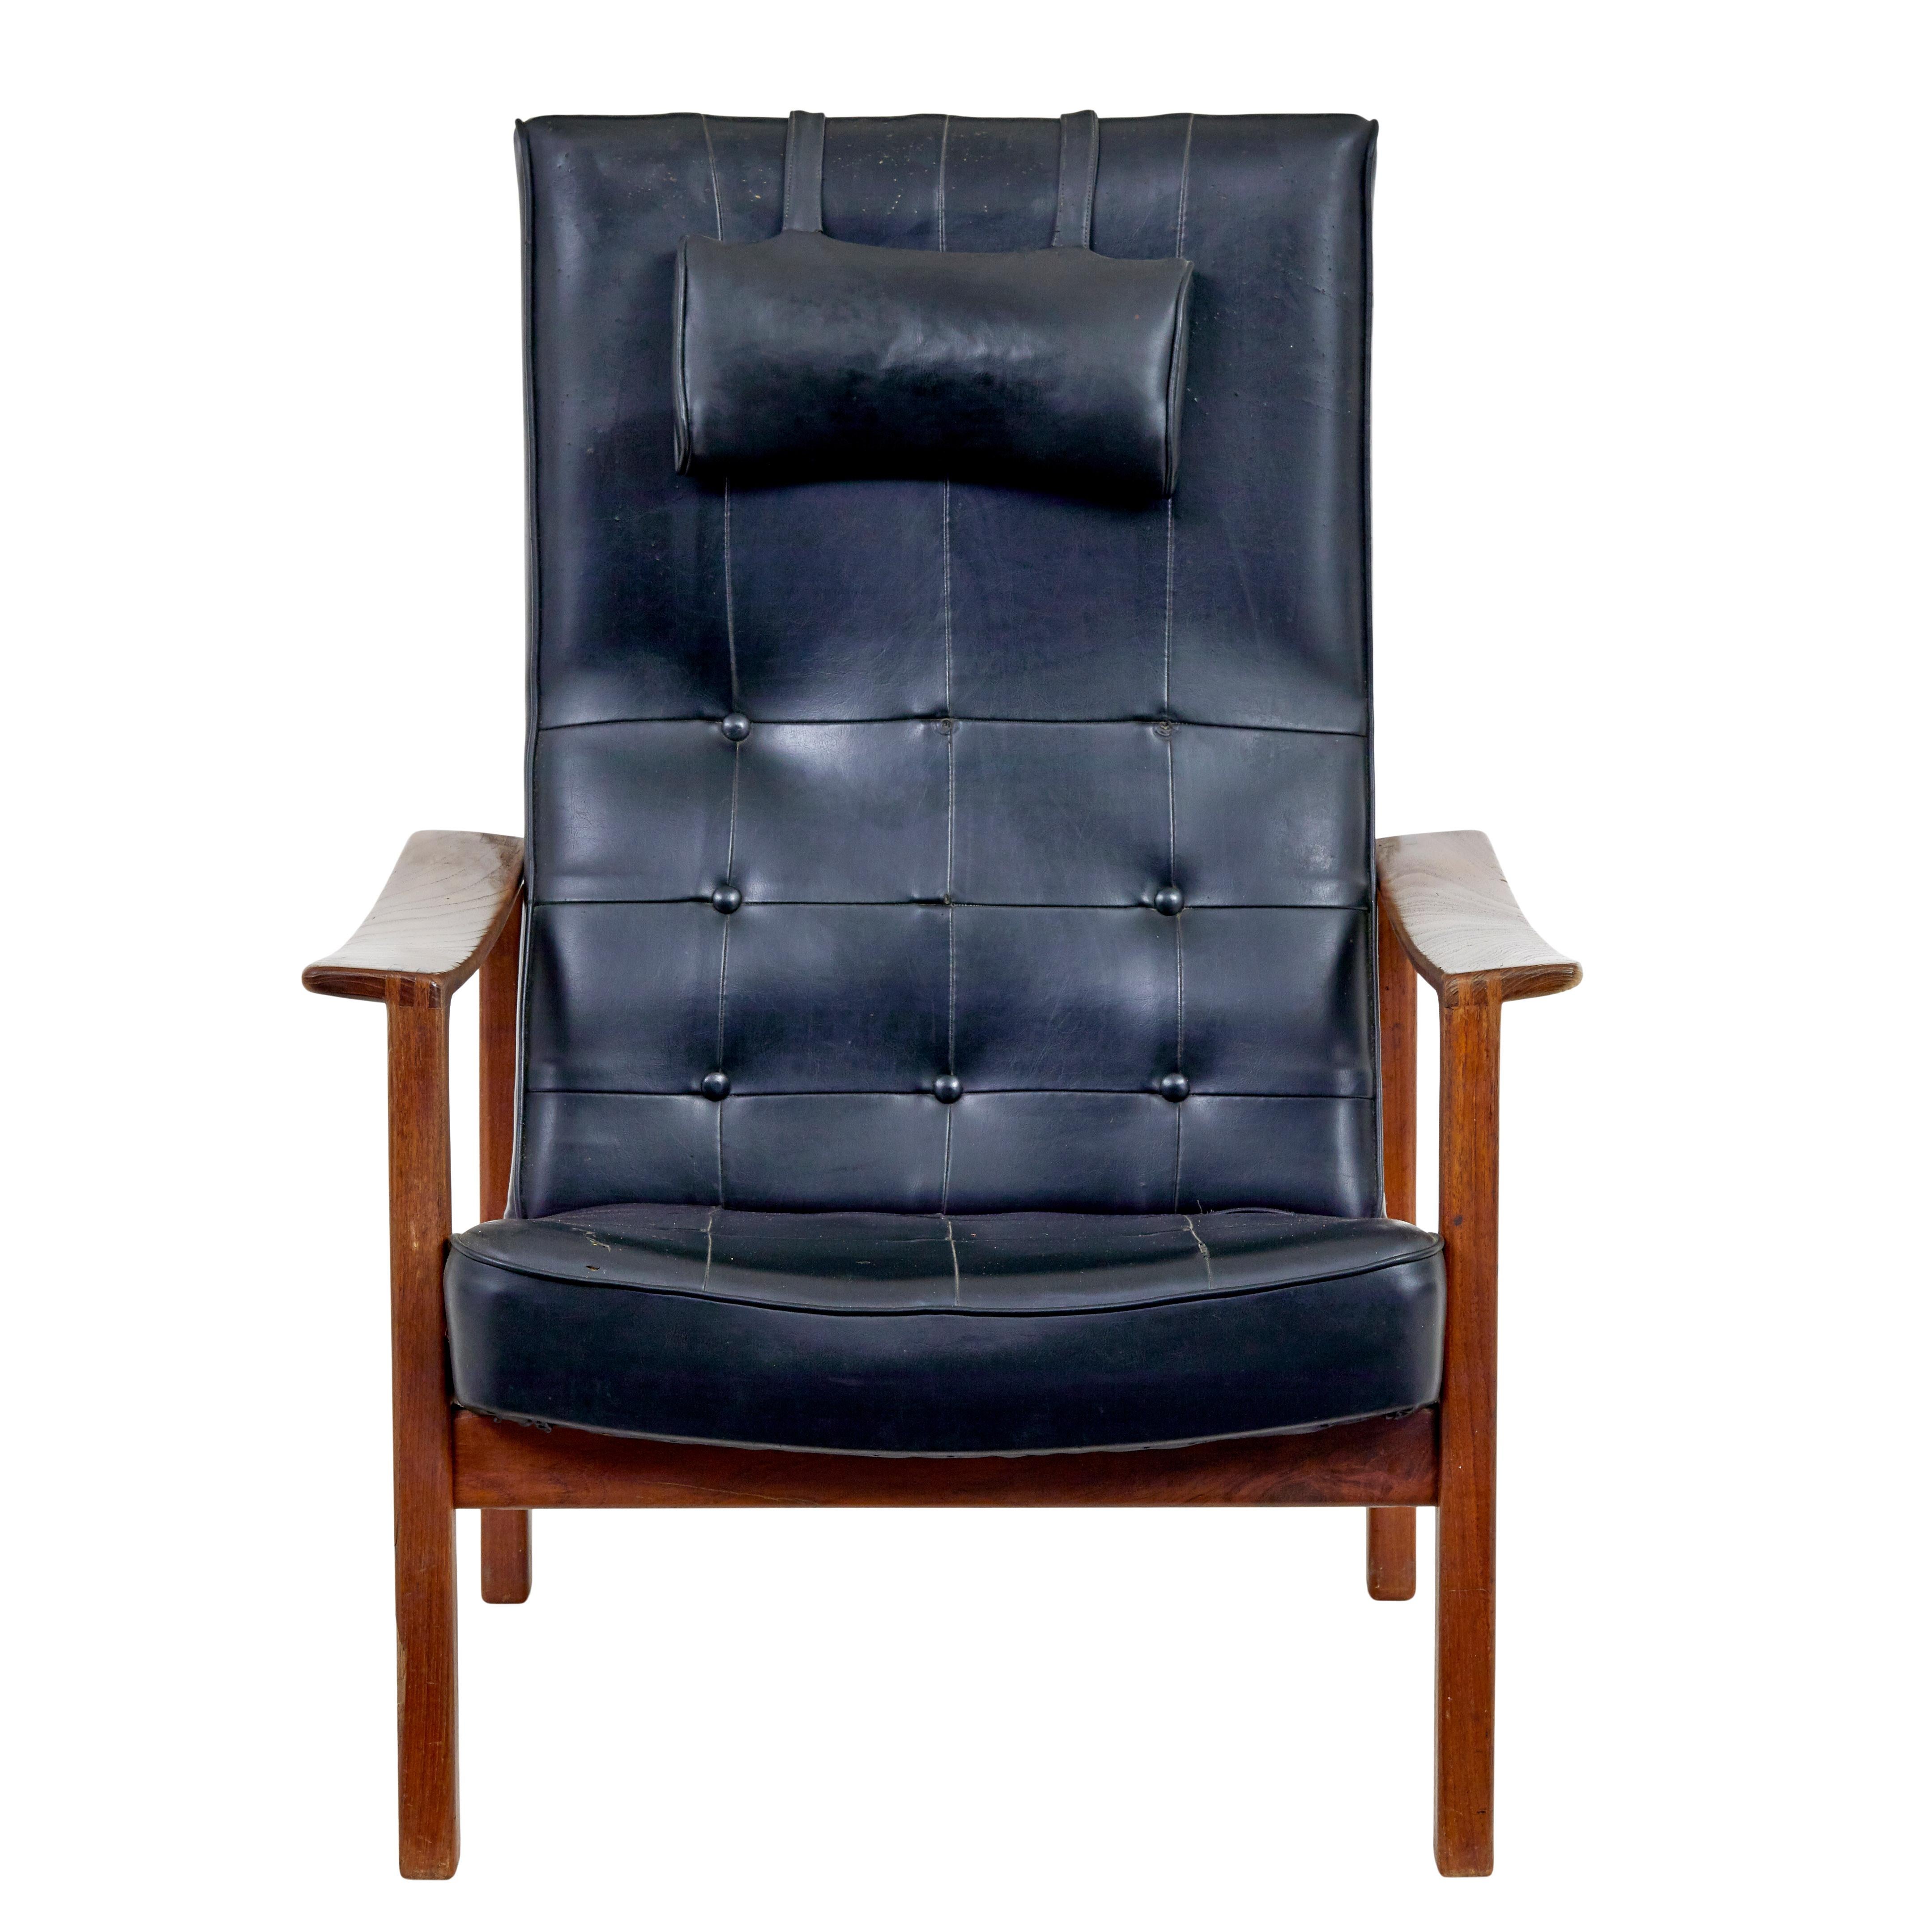 Mid 20th century Scandinavian modern teak reclining leather armchair circa 1960.

Solid teak show frame with a easy reclining action.  Elegant piece of Scandinavian mid century design.

Black leather with squared piping. A few buttons missing to the